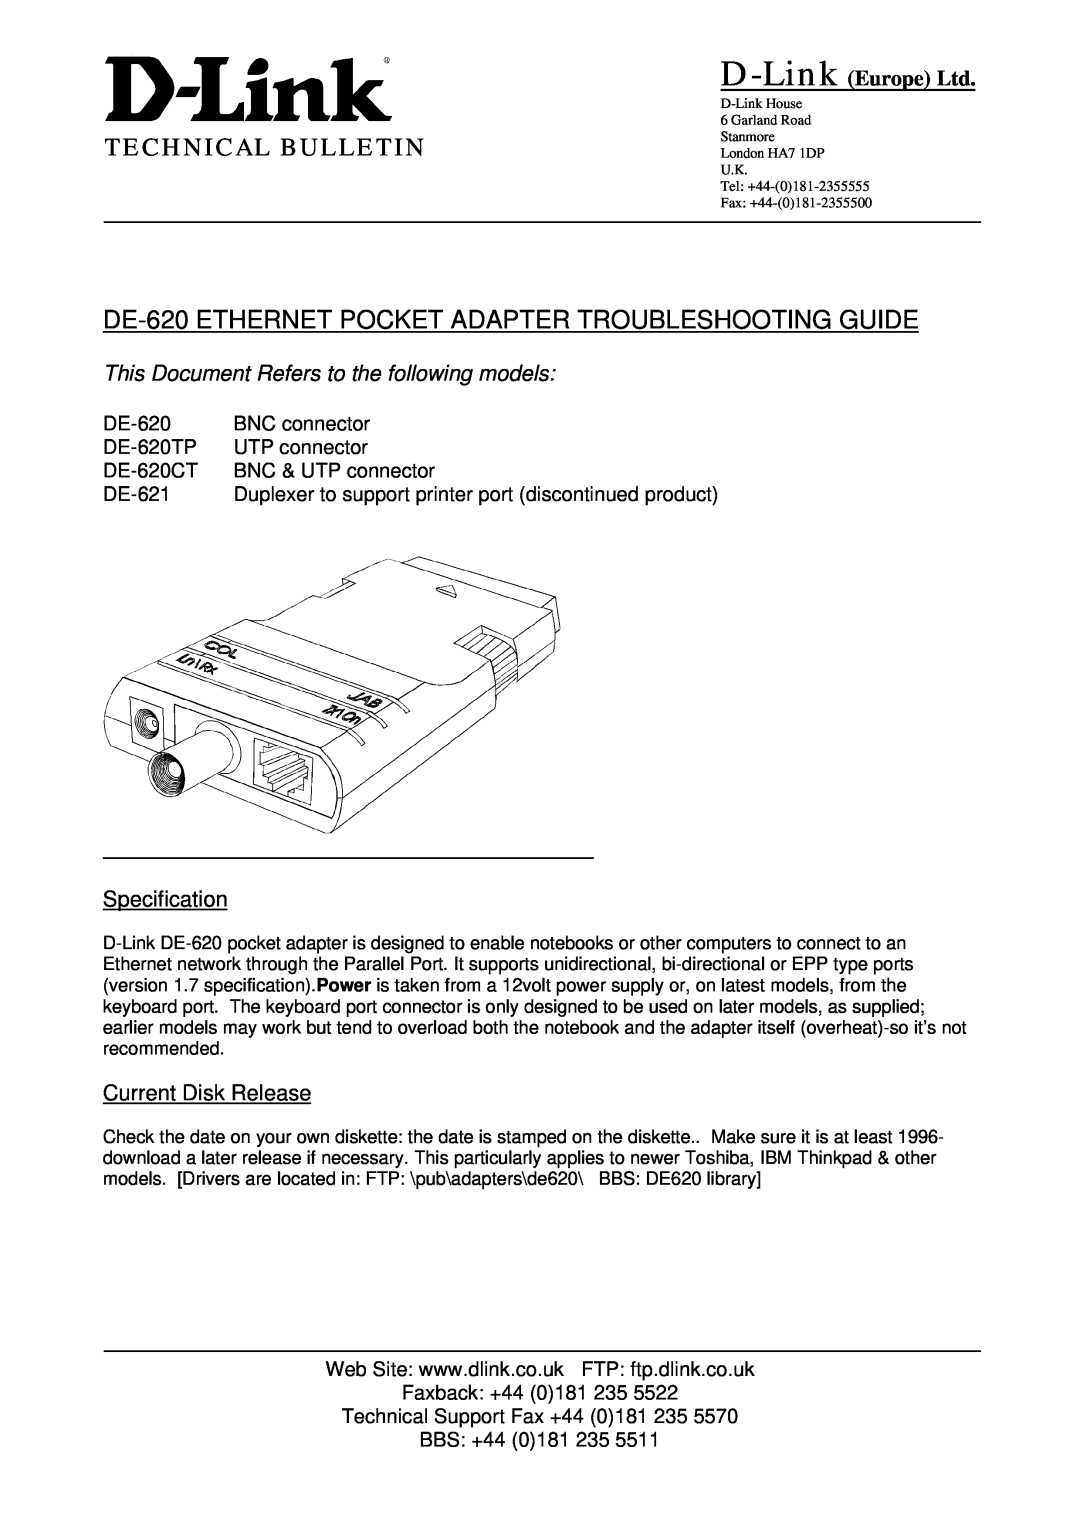 D-Link DE-620 manual Specification, Current Disk Release, Technical Bulletin, This Document Refers to the following models 